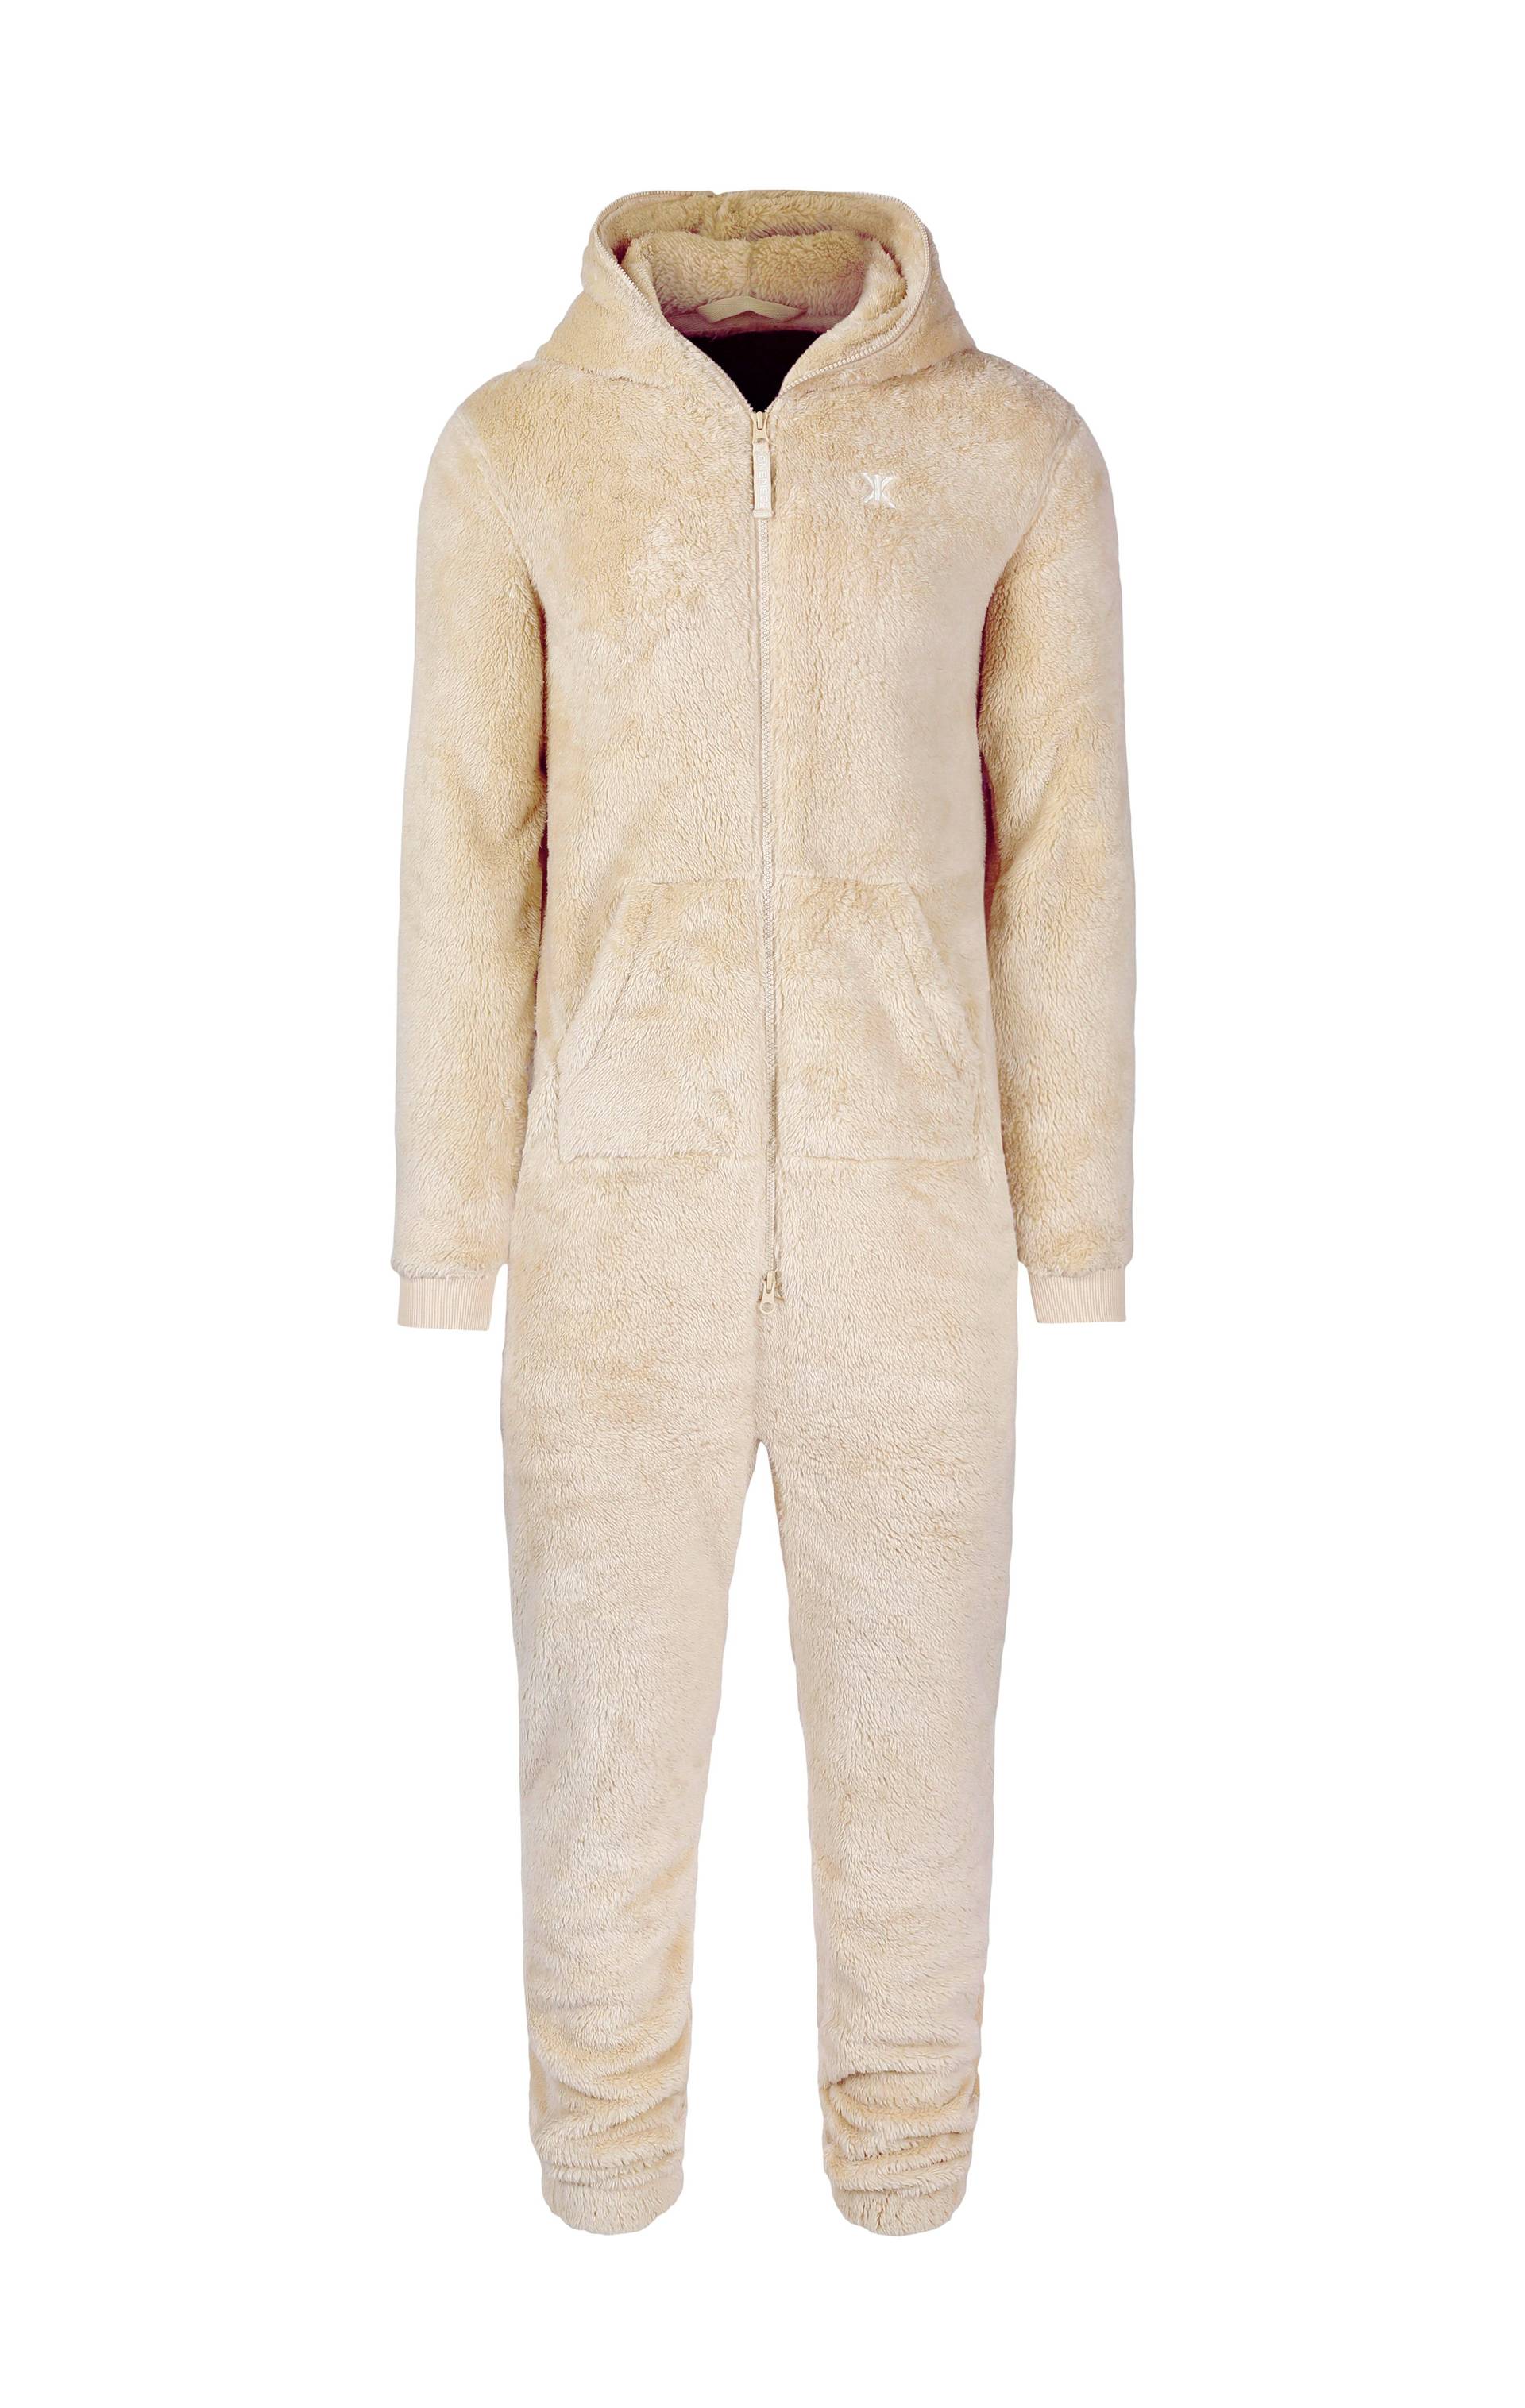 Onepiece The Puppy Jumpsuit Light Brown - 1